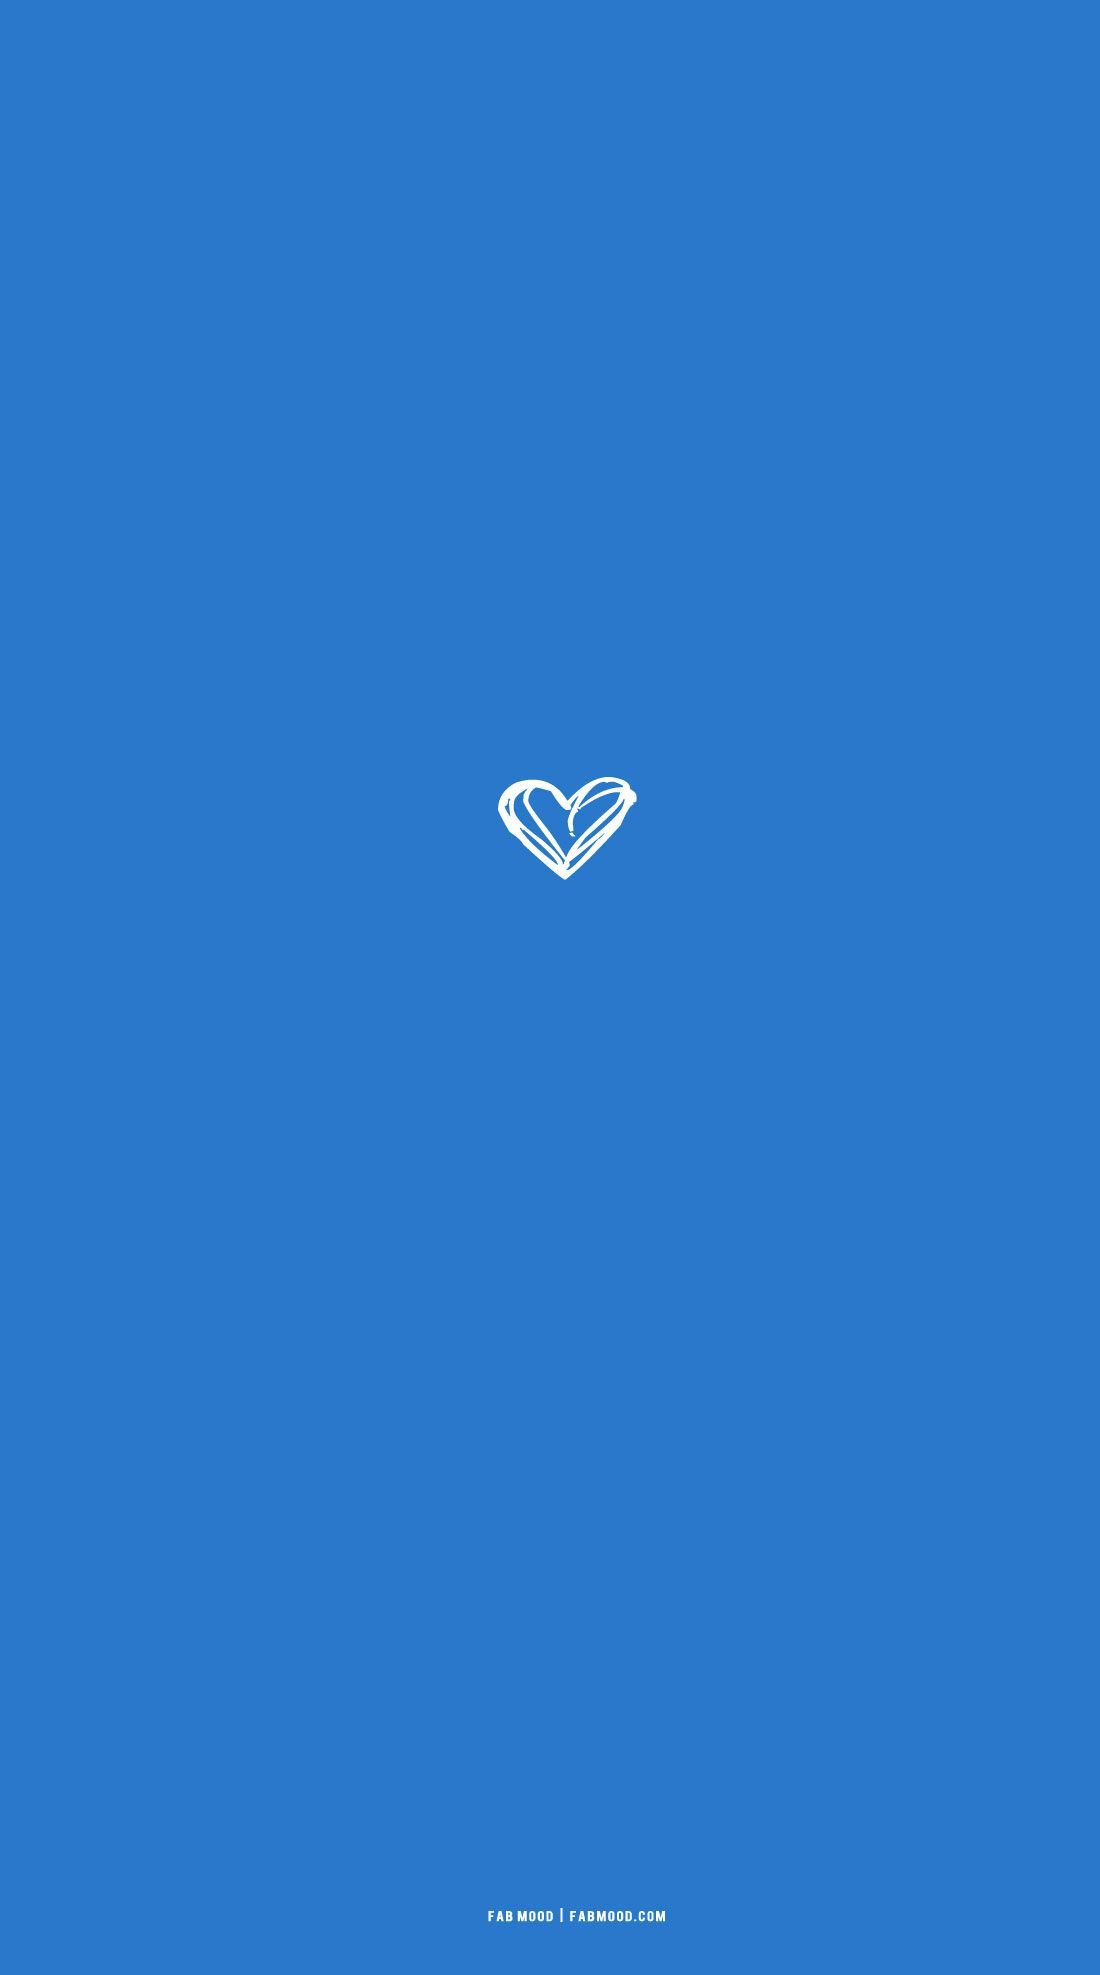 A blue wallpaper with a white heart in the middle - Heart, warm, illustration